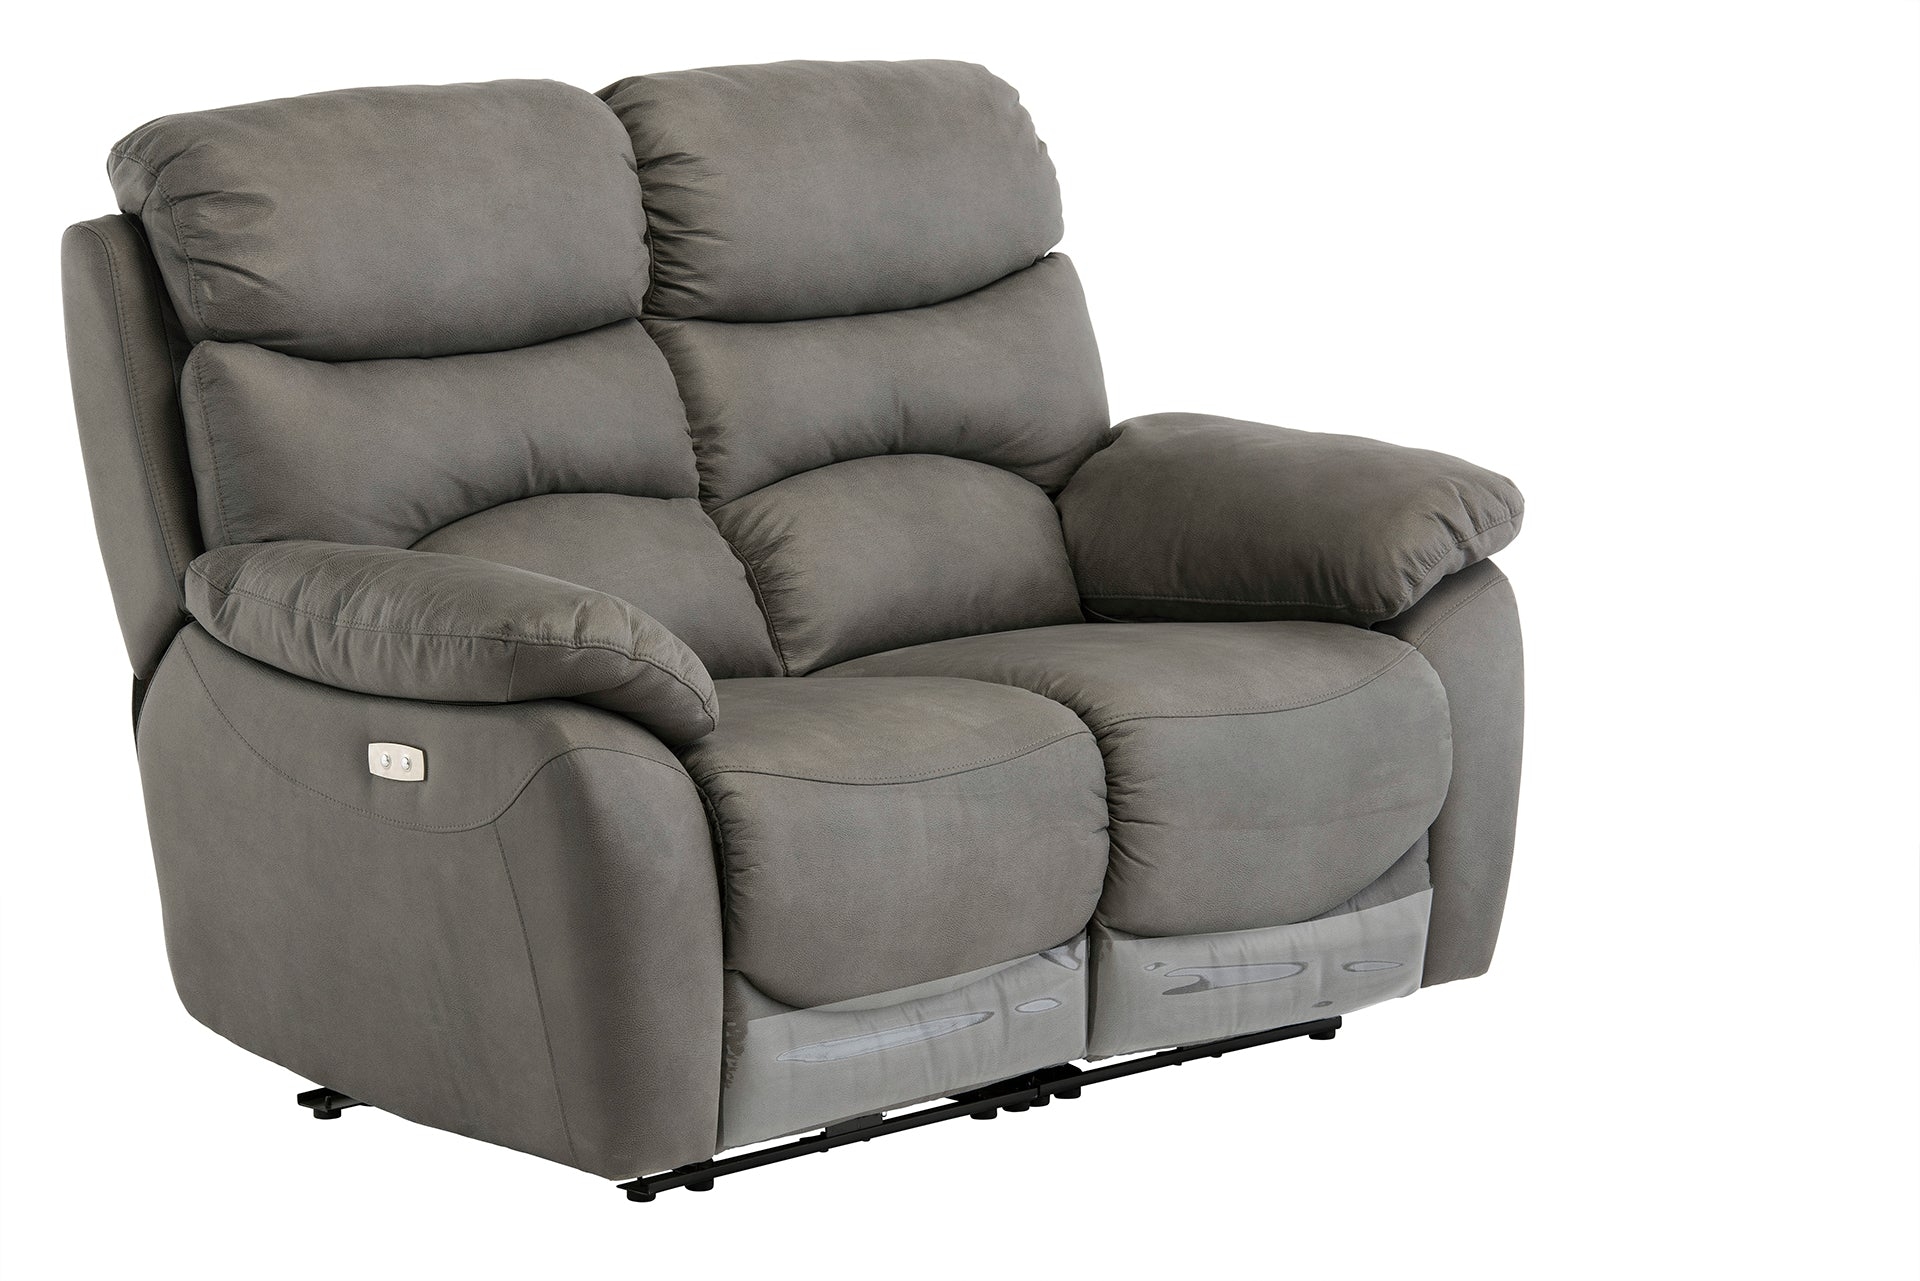 Lola Electric Recliner 2 Seater Sofa – USB Ports, Grey – Lc Living